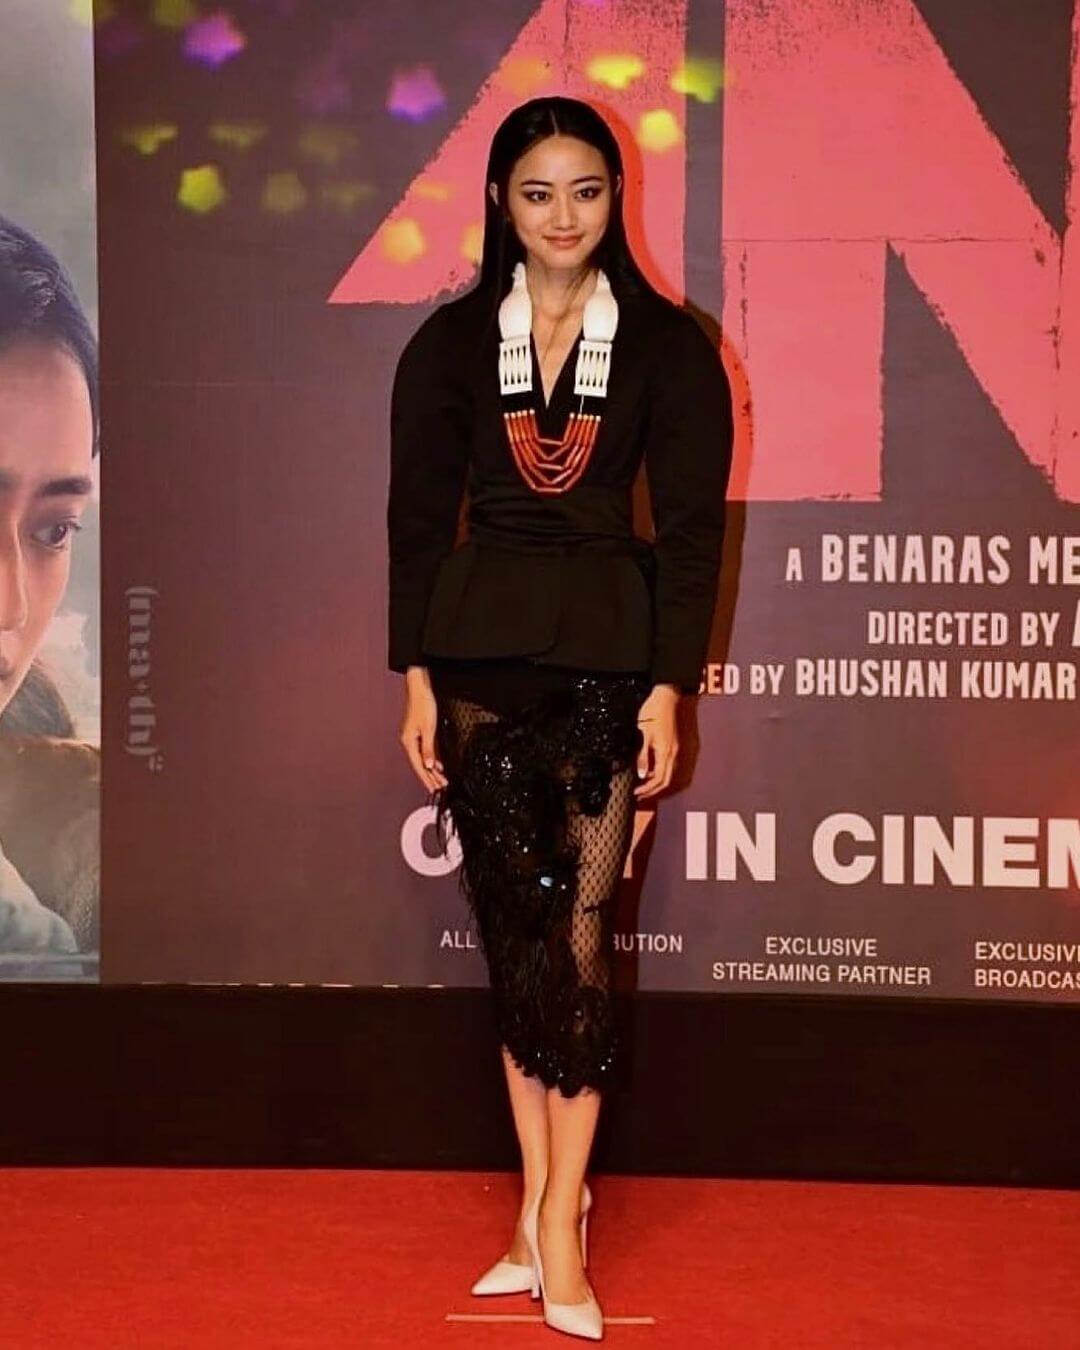 Beauty Babe Andrea Donning in Beautiful Black Dress with Traditional Kohima Neck Piece